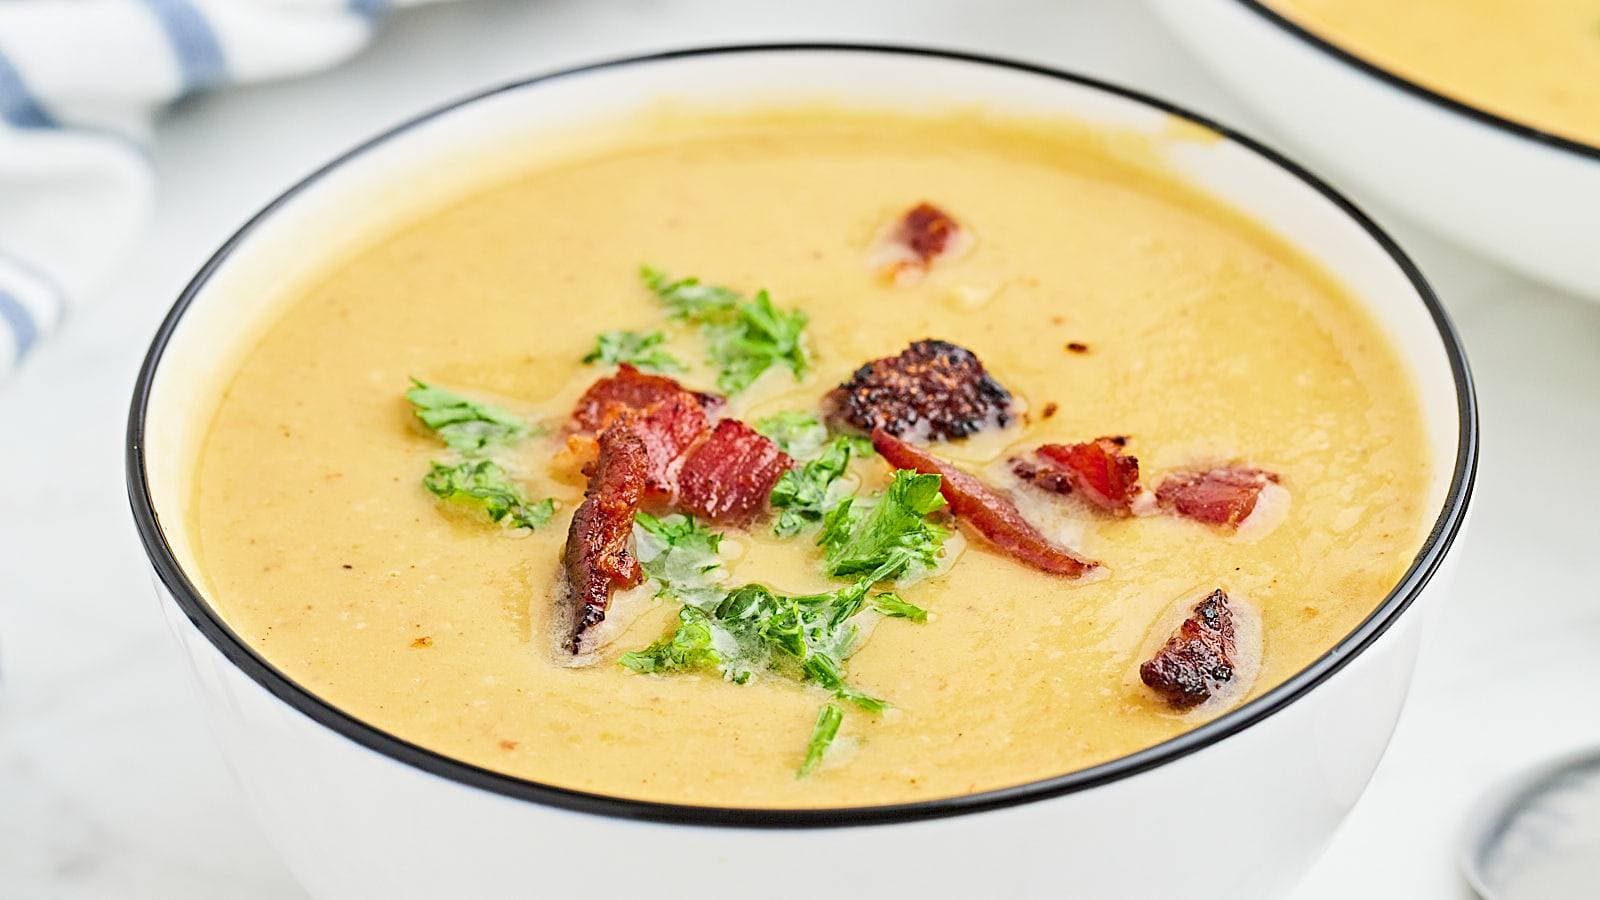 Butternut Squash Soup Recipe by Cheerful Cook.